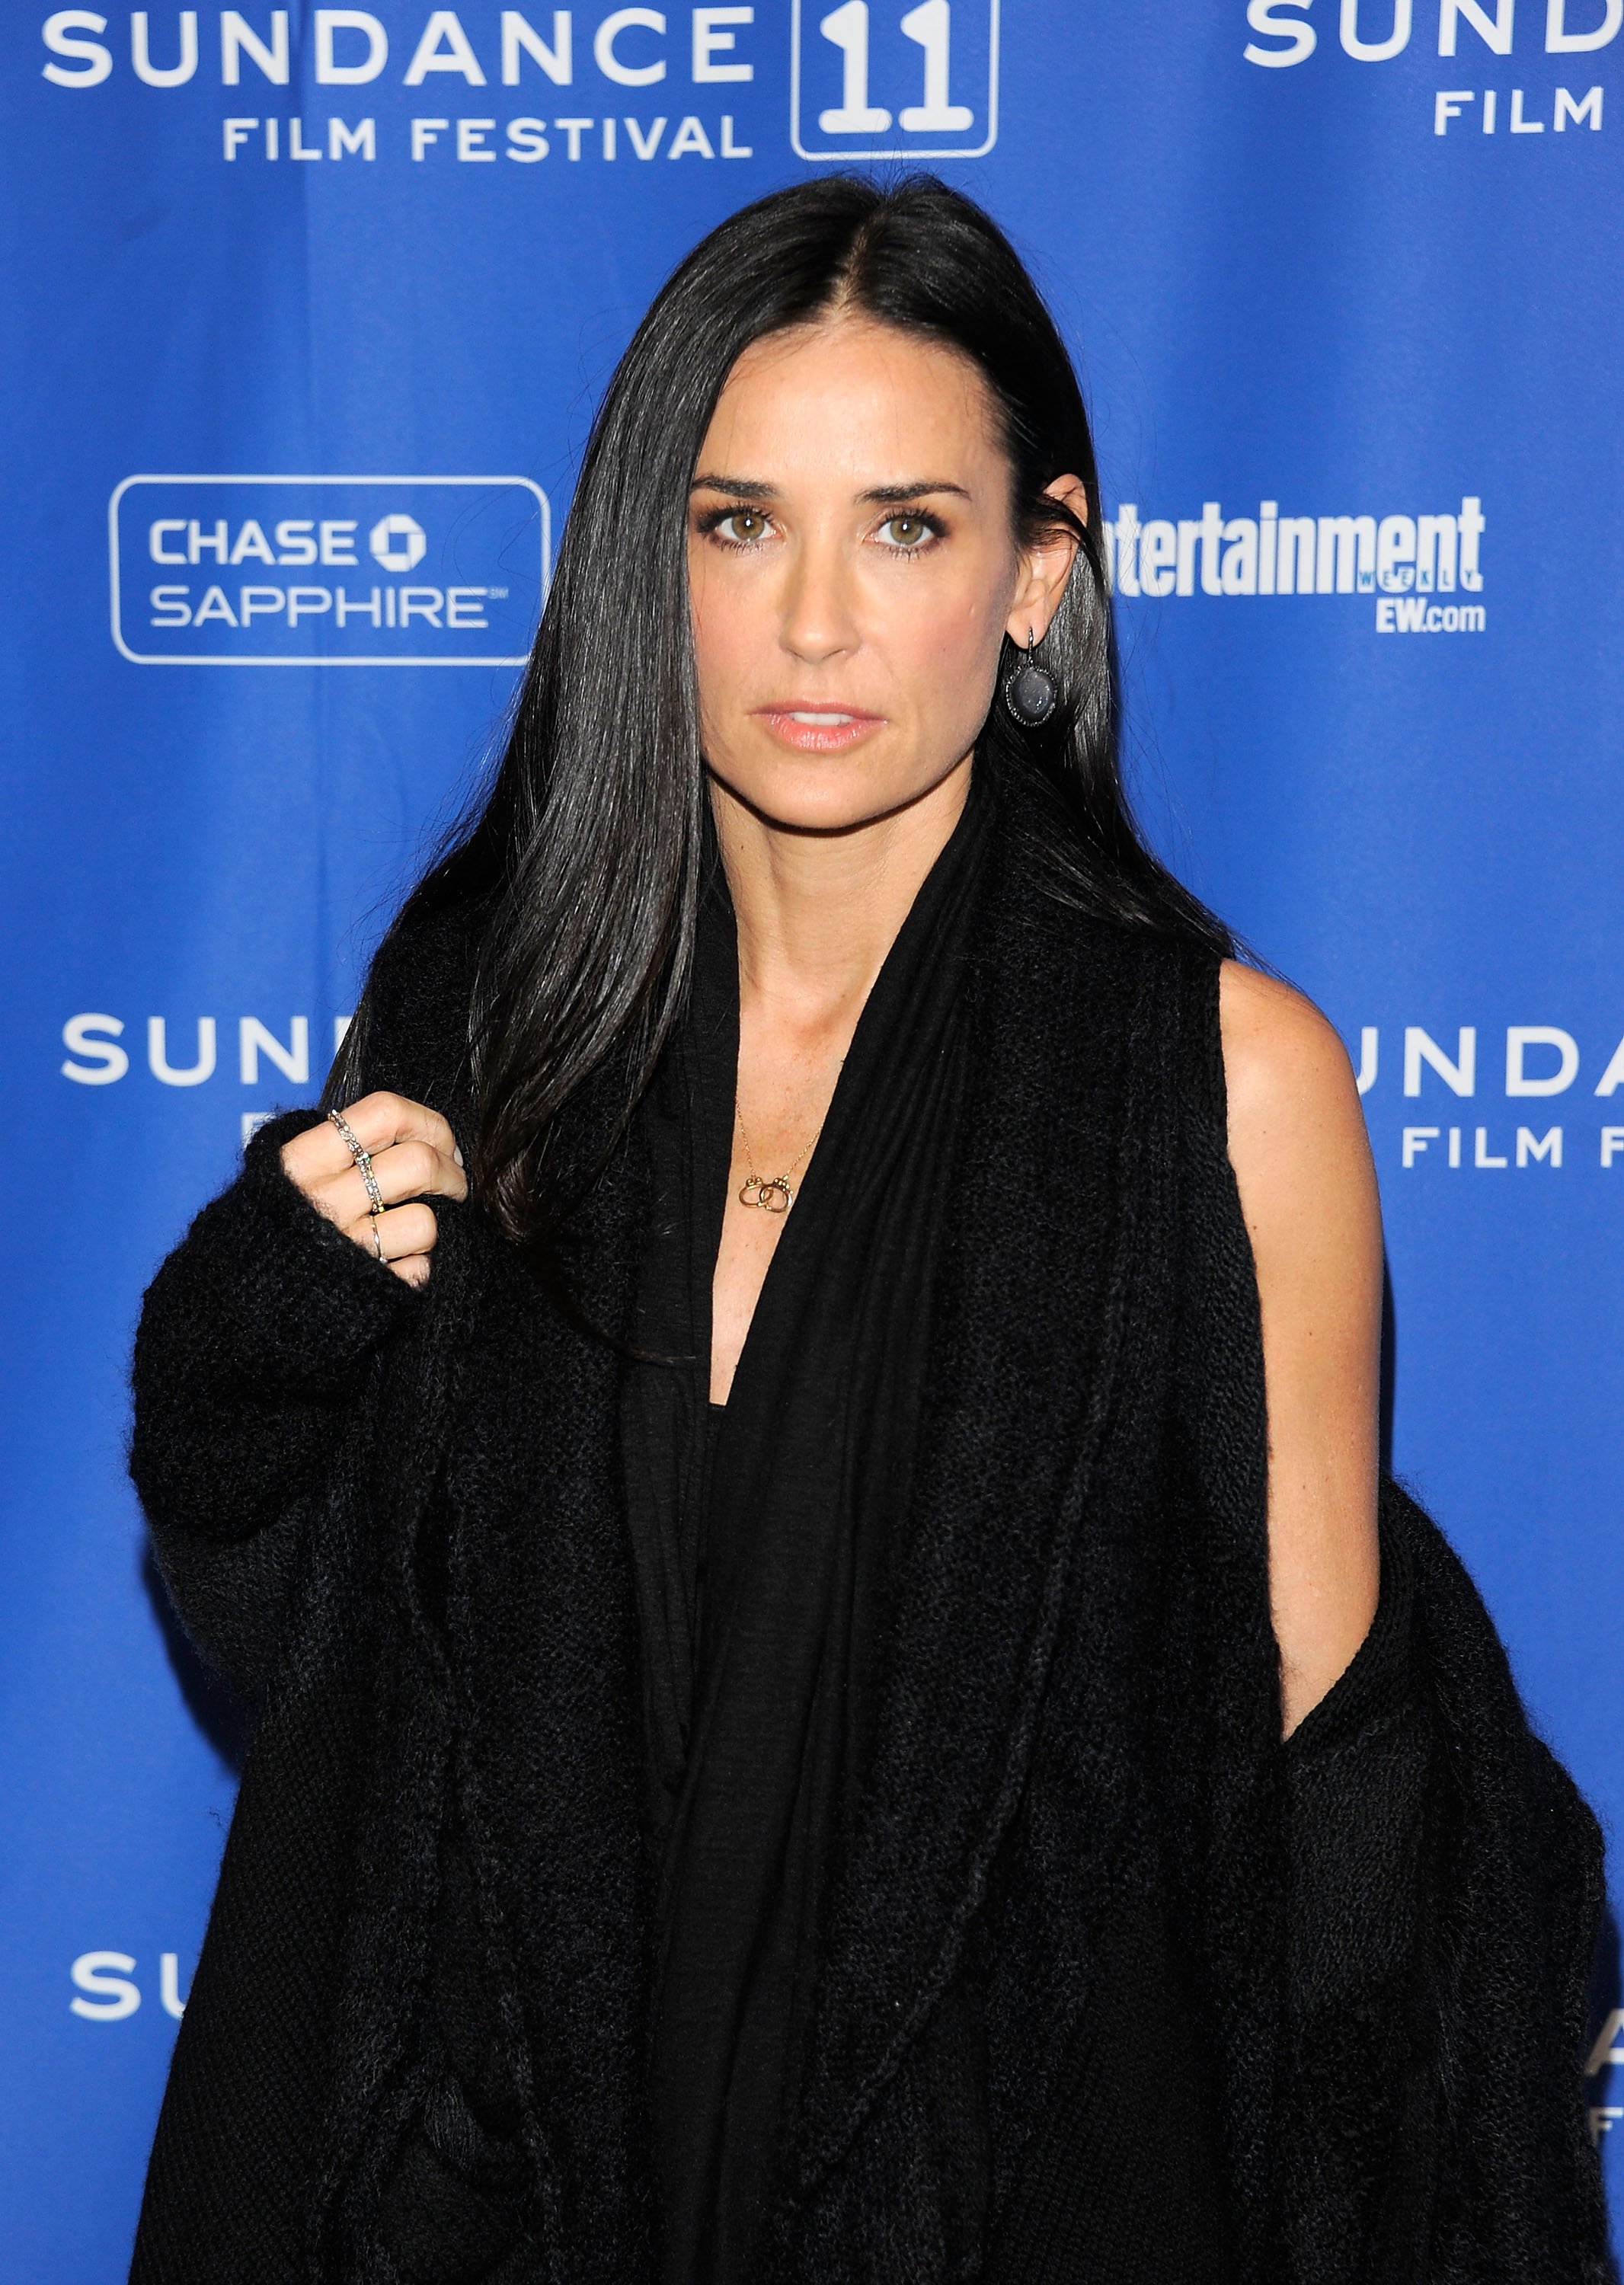 Demi Moore attends the "Another Happy Day" Premiere at the Eccles Center Theatre during the 2011 Sundance Film Festival on January 23, 2011, in Park City, Utah. | Source: Getty Images.